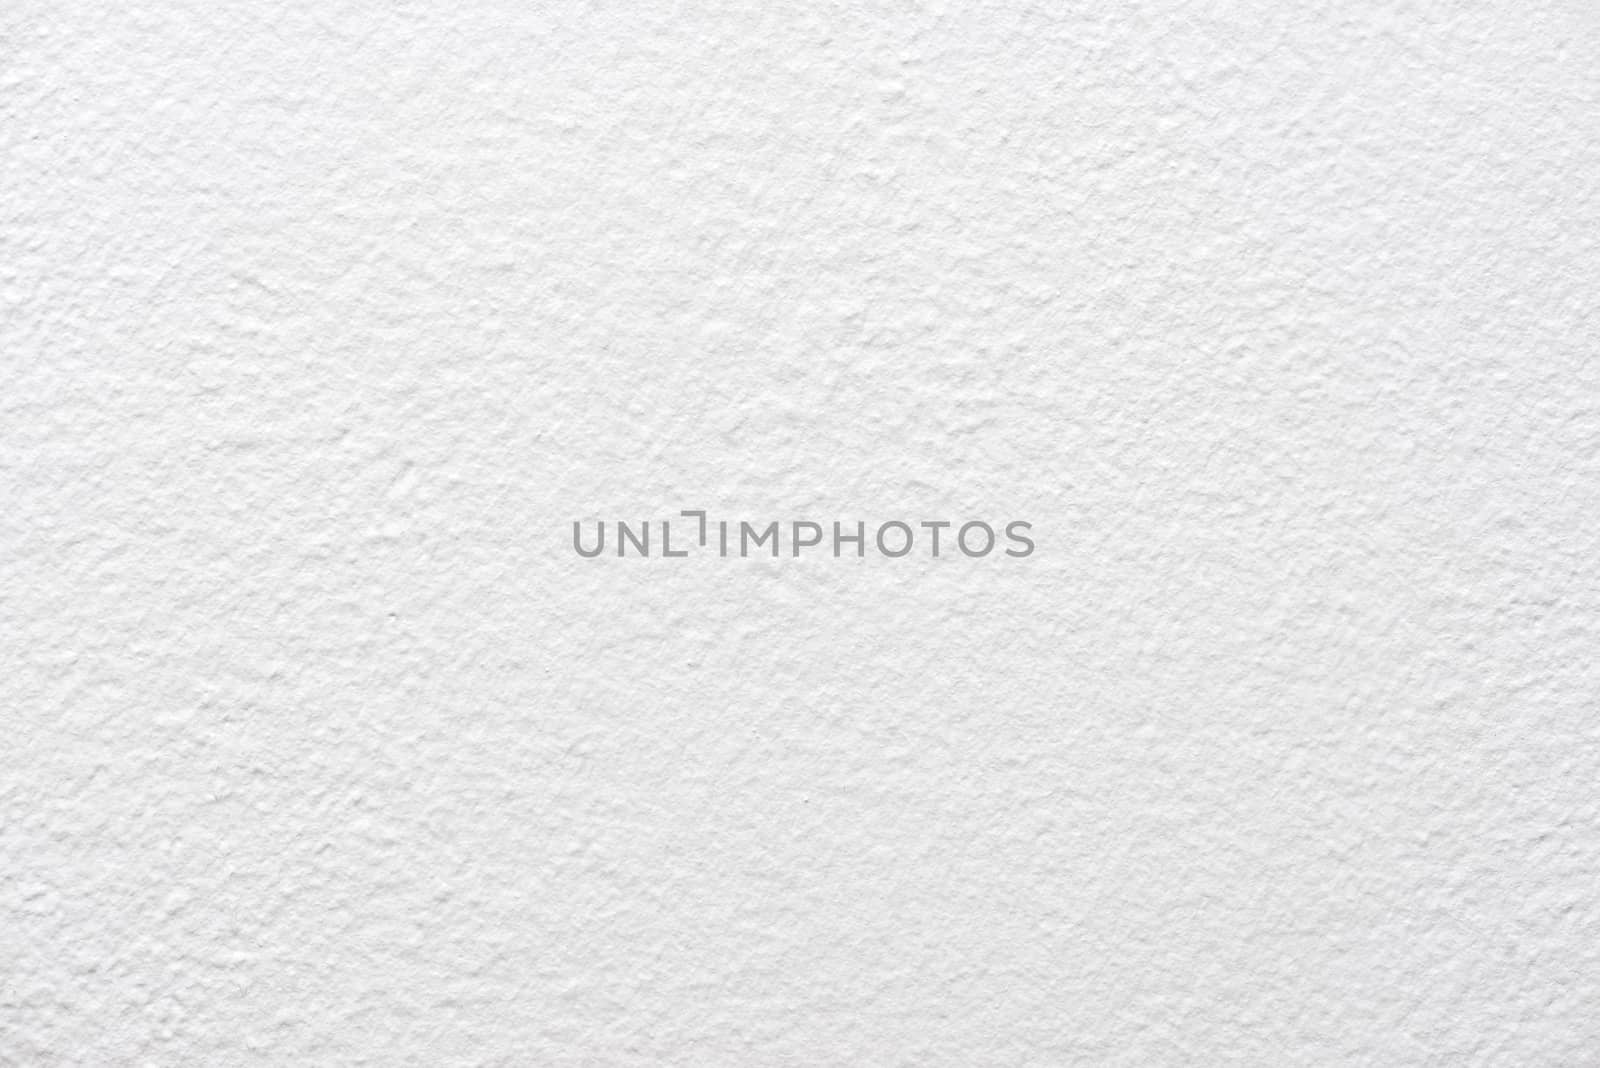 texture of a white wall